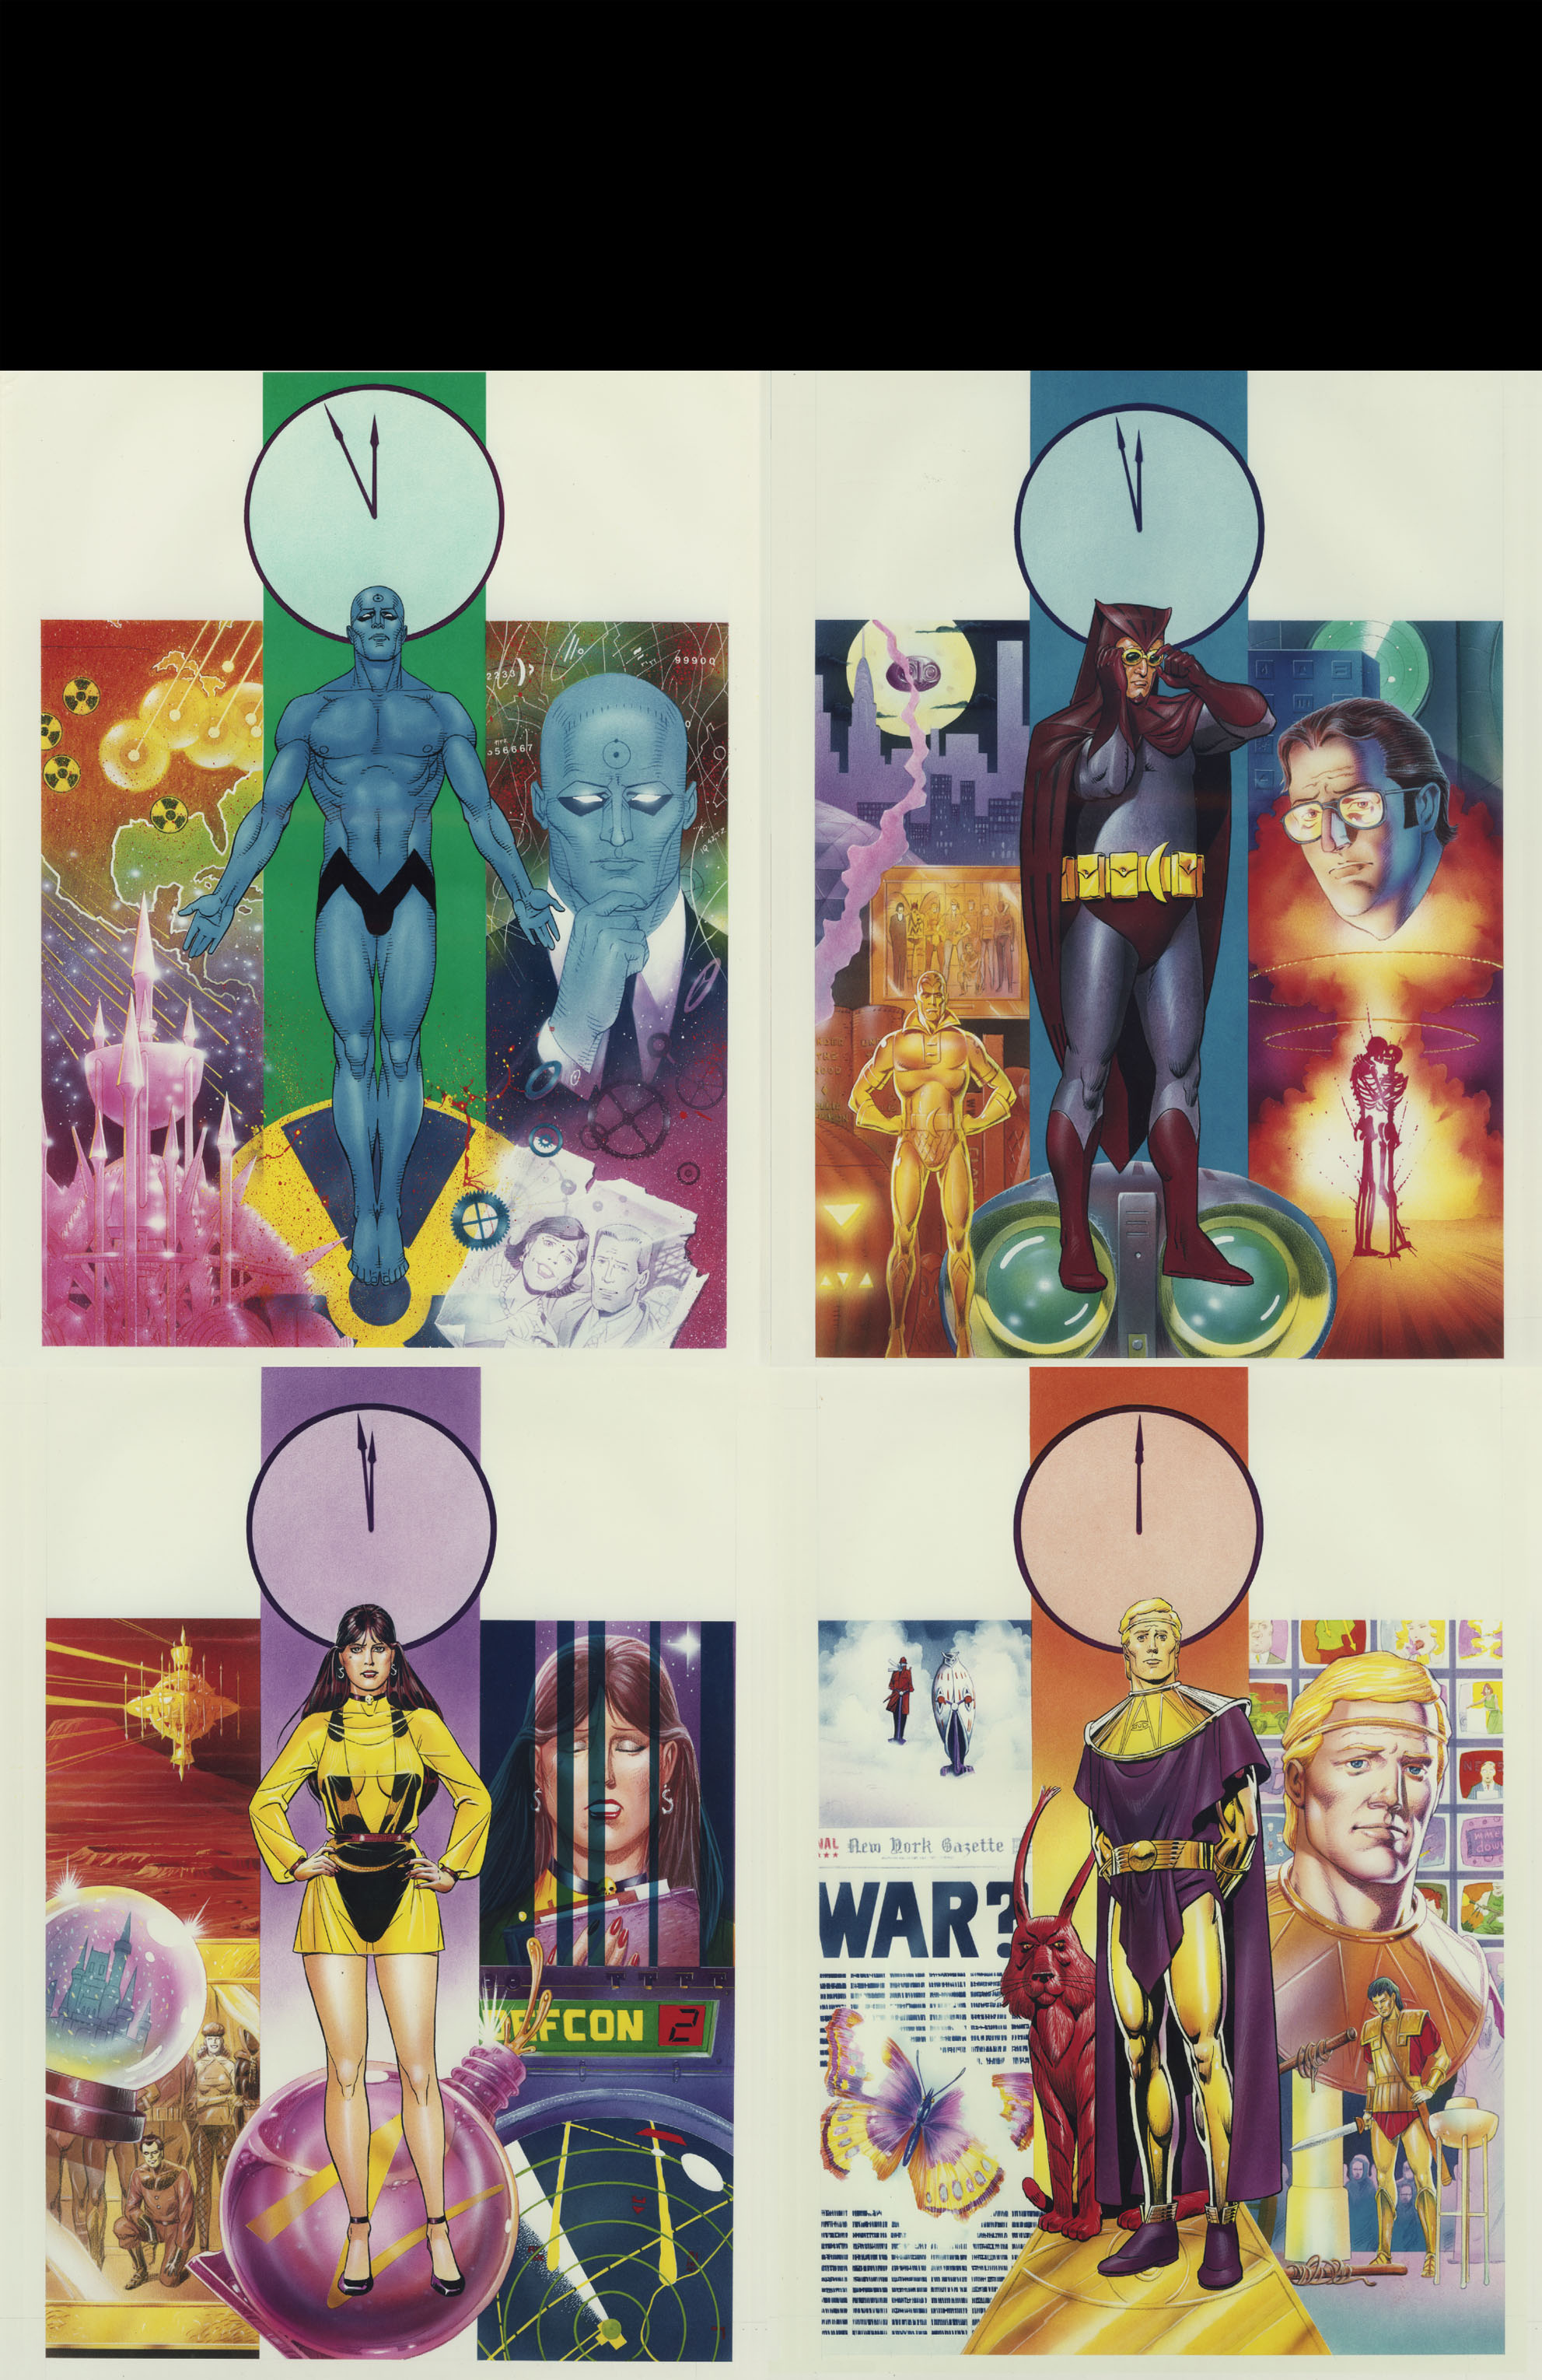 Watchmen Picture by Dave Gibbons